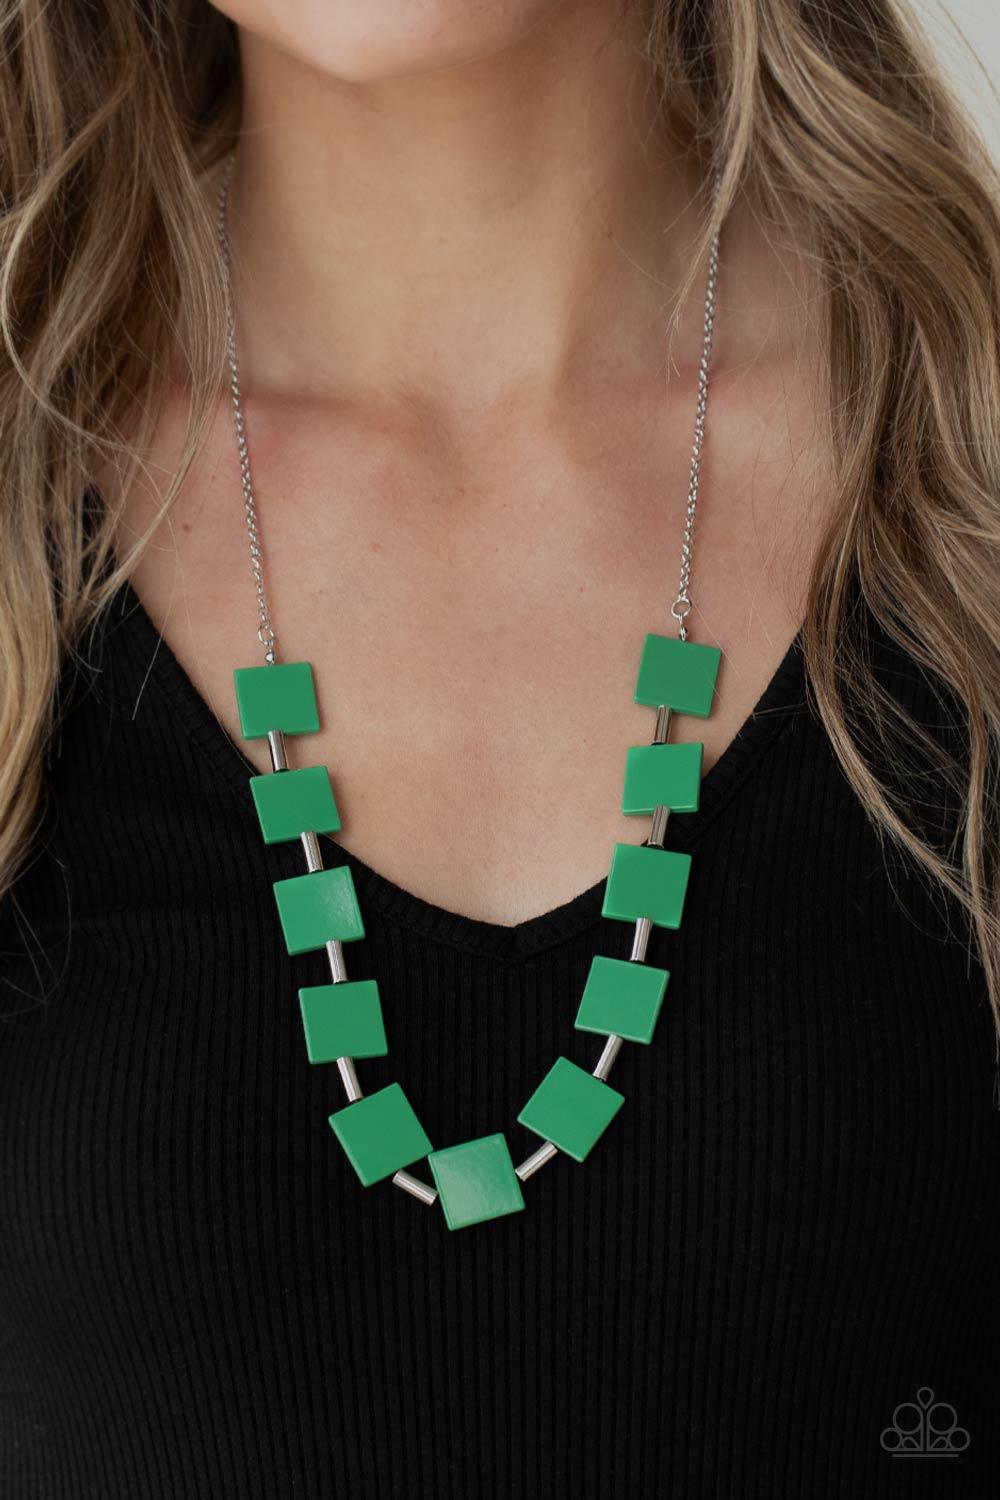 Paparazzi Accessories Hello, Material Girl - Green Vibrant geometric squares painted in the spring Pantone® of Mint flare out along a long silver chain as it drapes along the chest. Sleek silver cylinders separate the square plates, adding cool metallic a